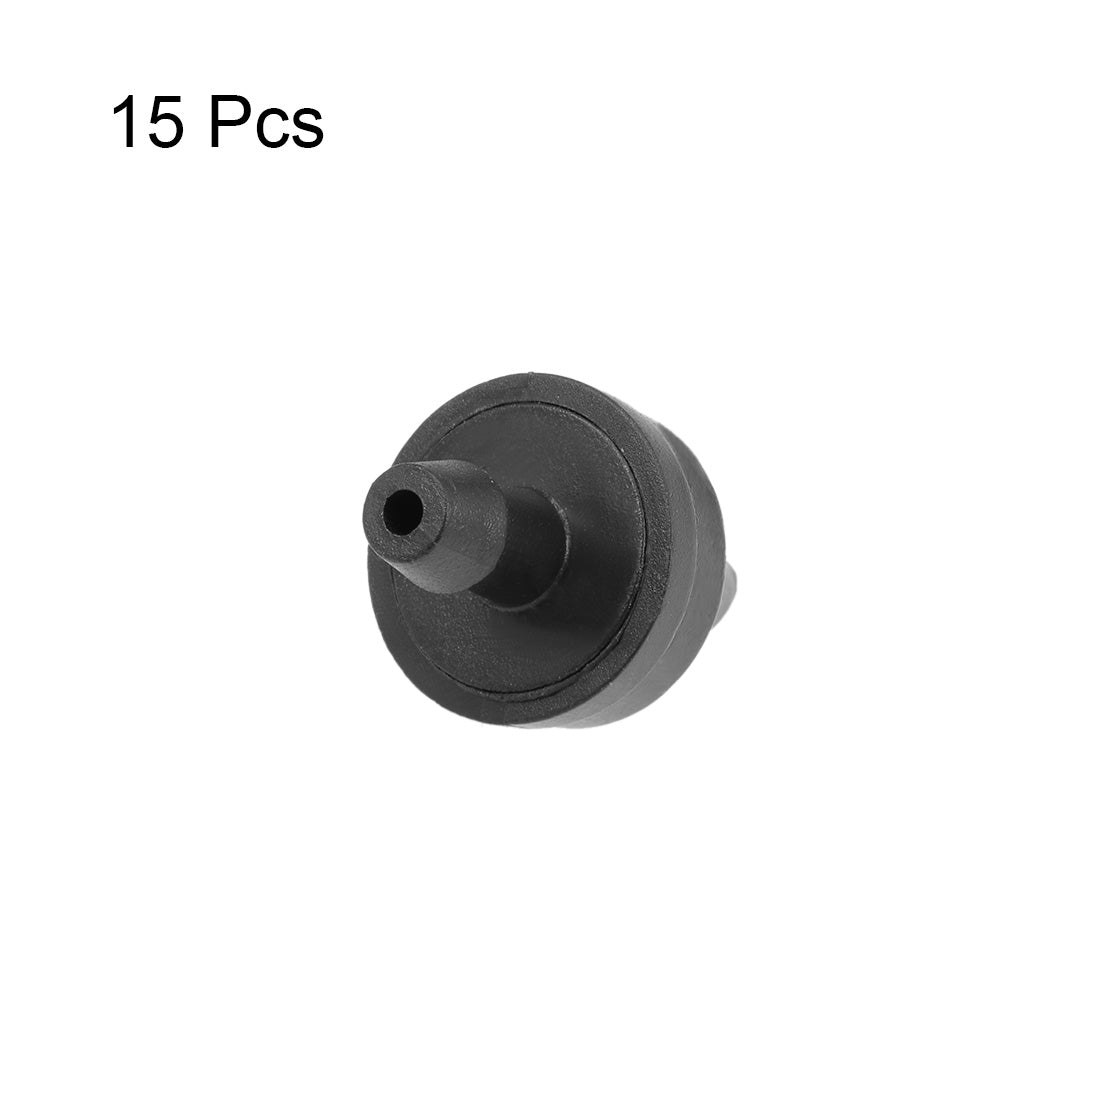 uxcell Uxcell Pressure Compensating Dripper 2.6GPH 10L/H Emitter for Garden Lawn Drip Irrigation with Barbed Hose Connector Plastic Black 15pcs